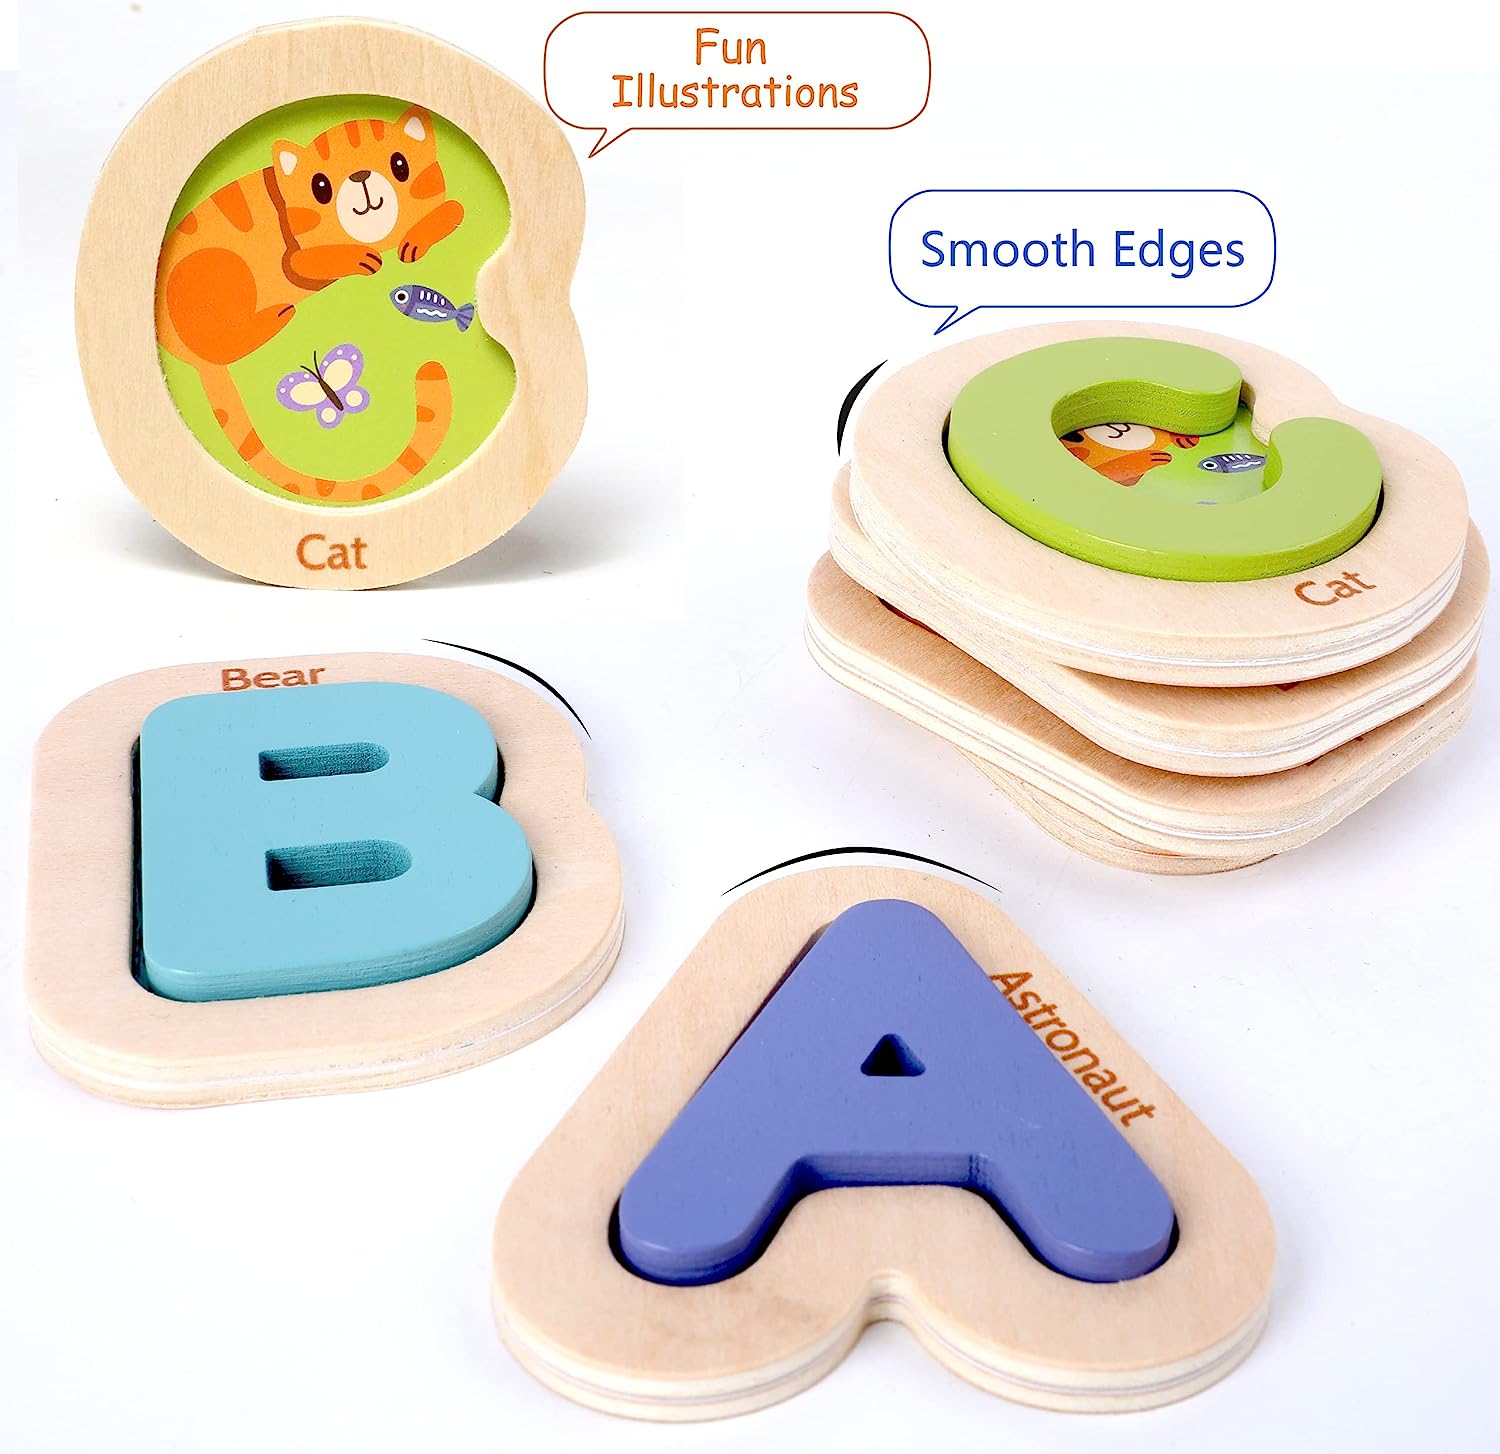 Wooden Alphabet Puzzle – ABC Letters Sorting Board Blocks Game Jigsaw Educational Early Learning Toy Gift for Preschool Year Old Kids,Age 3+